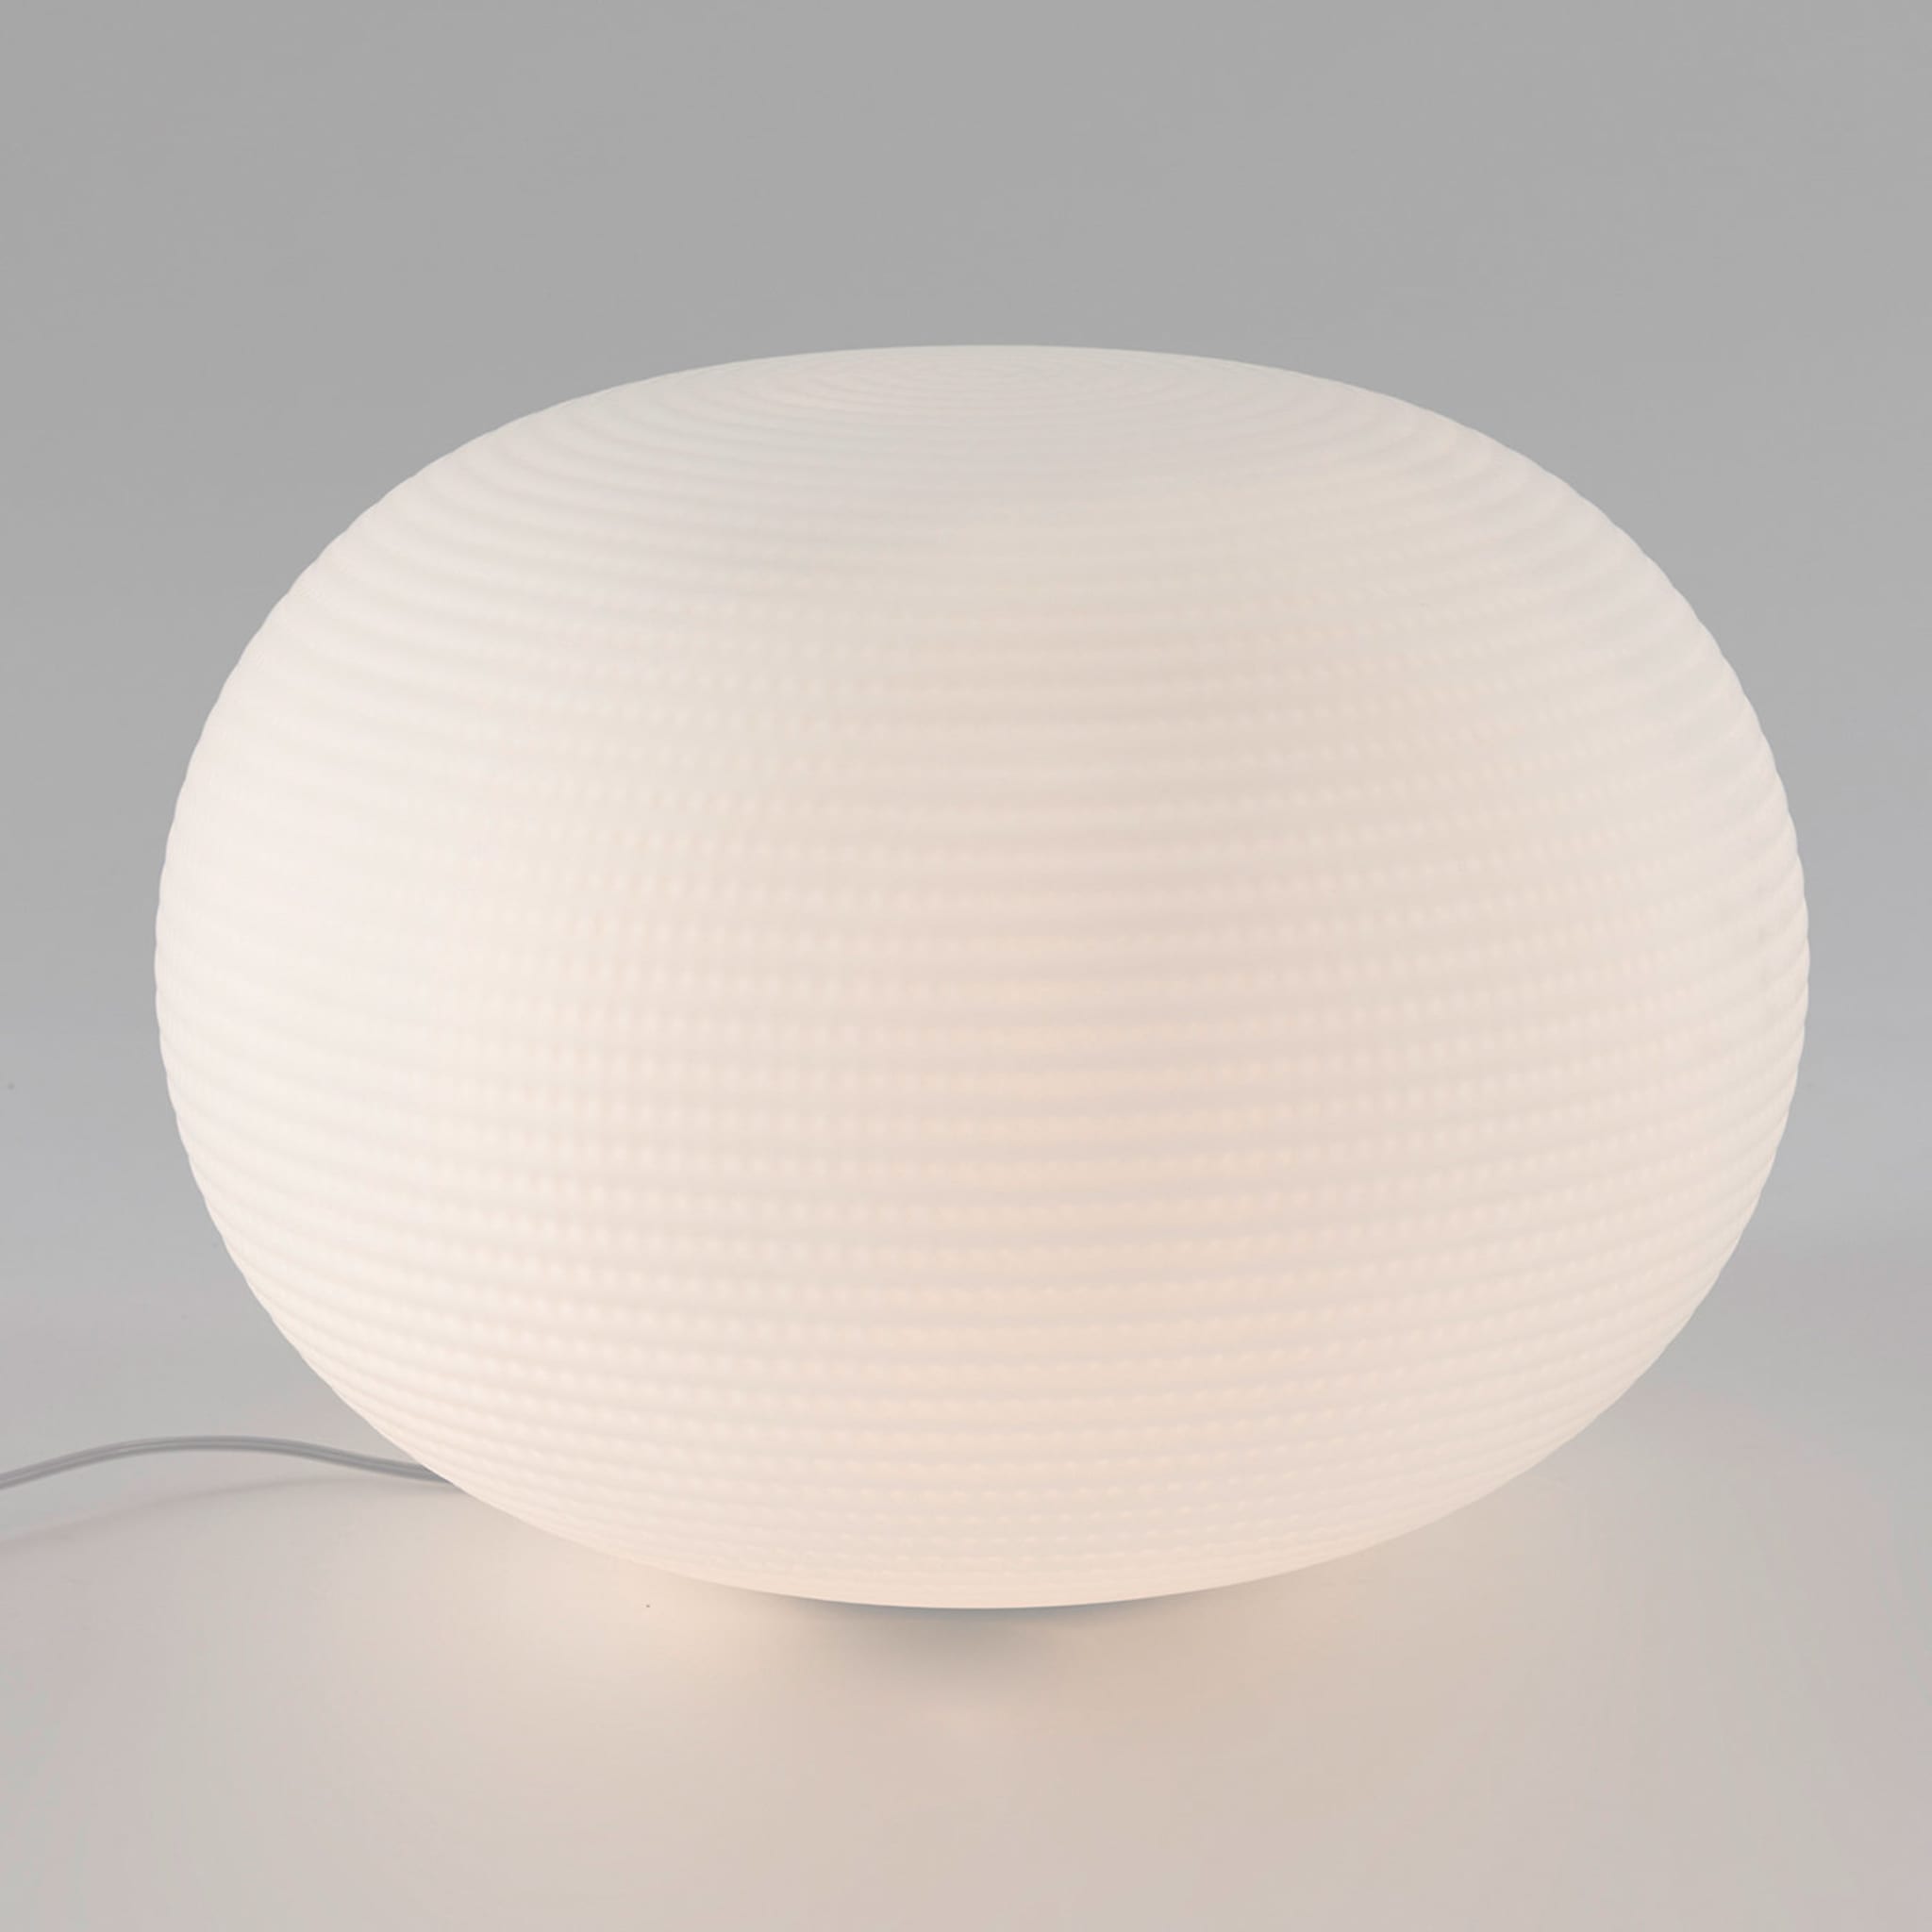 Bianca Large Table Lamp by Matti Klenell - Alternative view 1